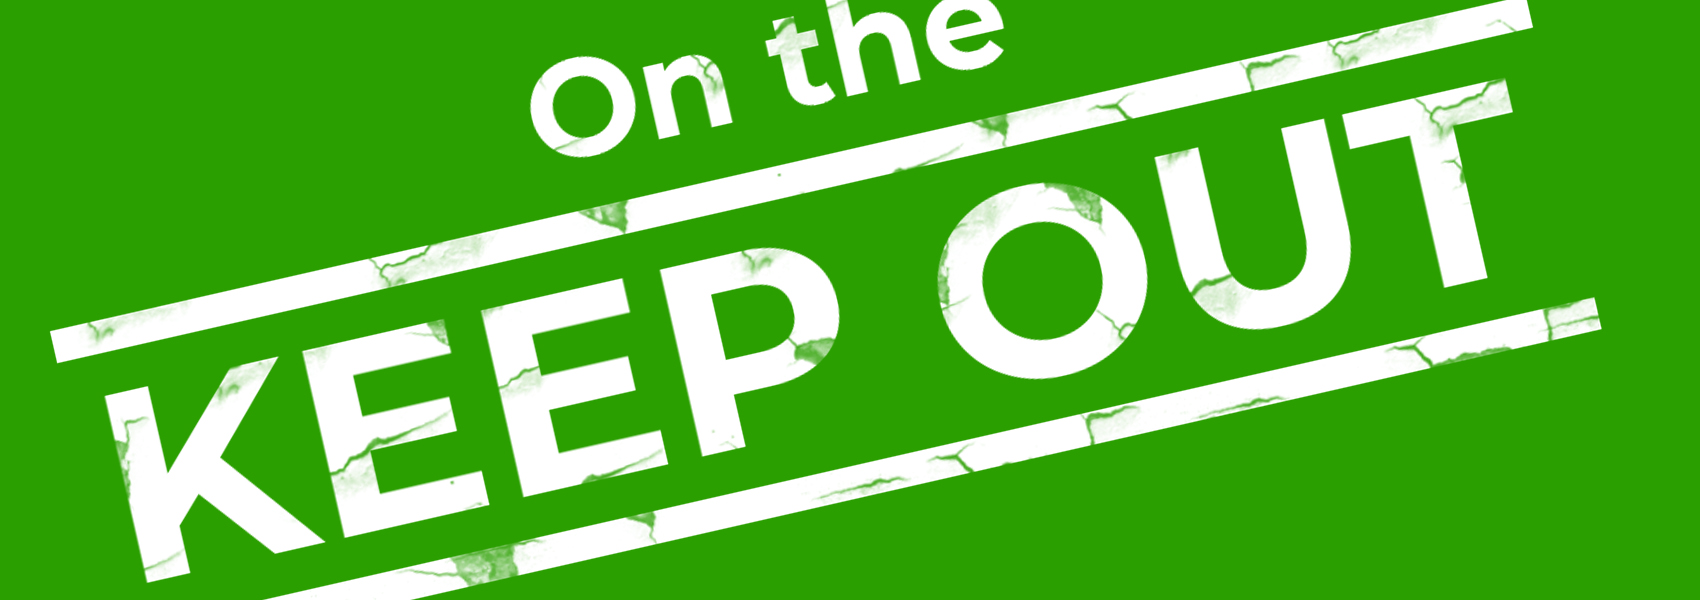 On the keepouts Blog Banner